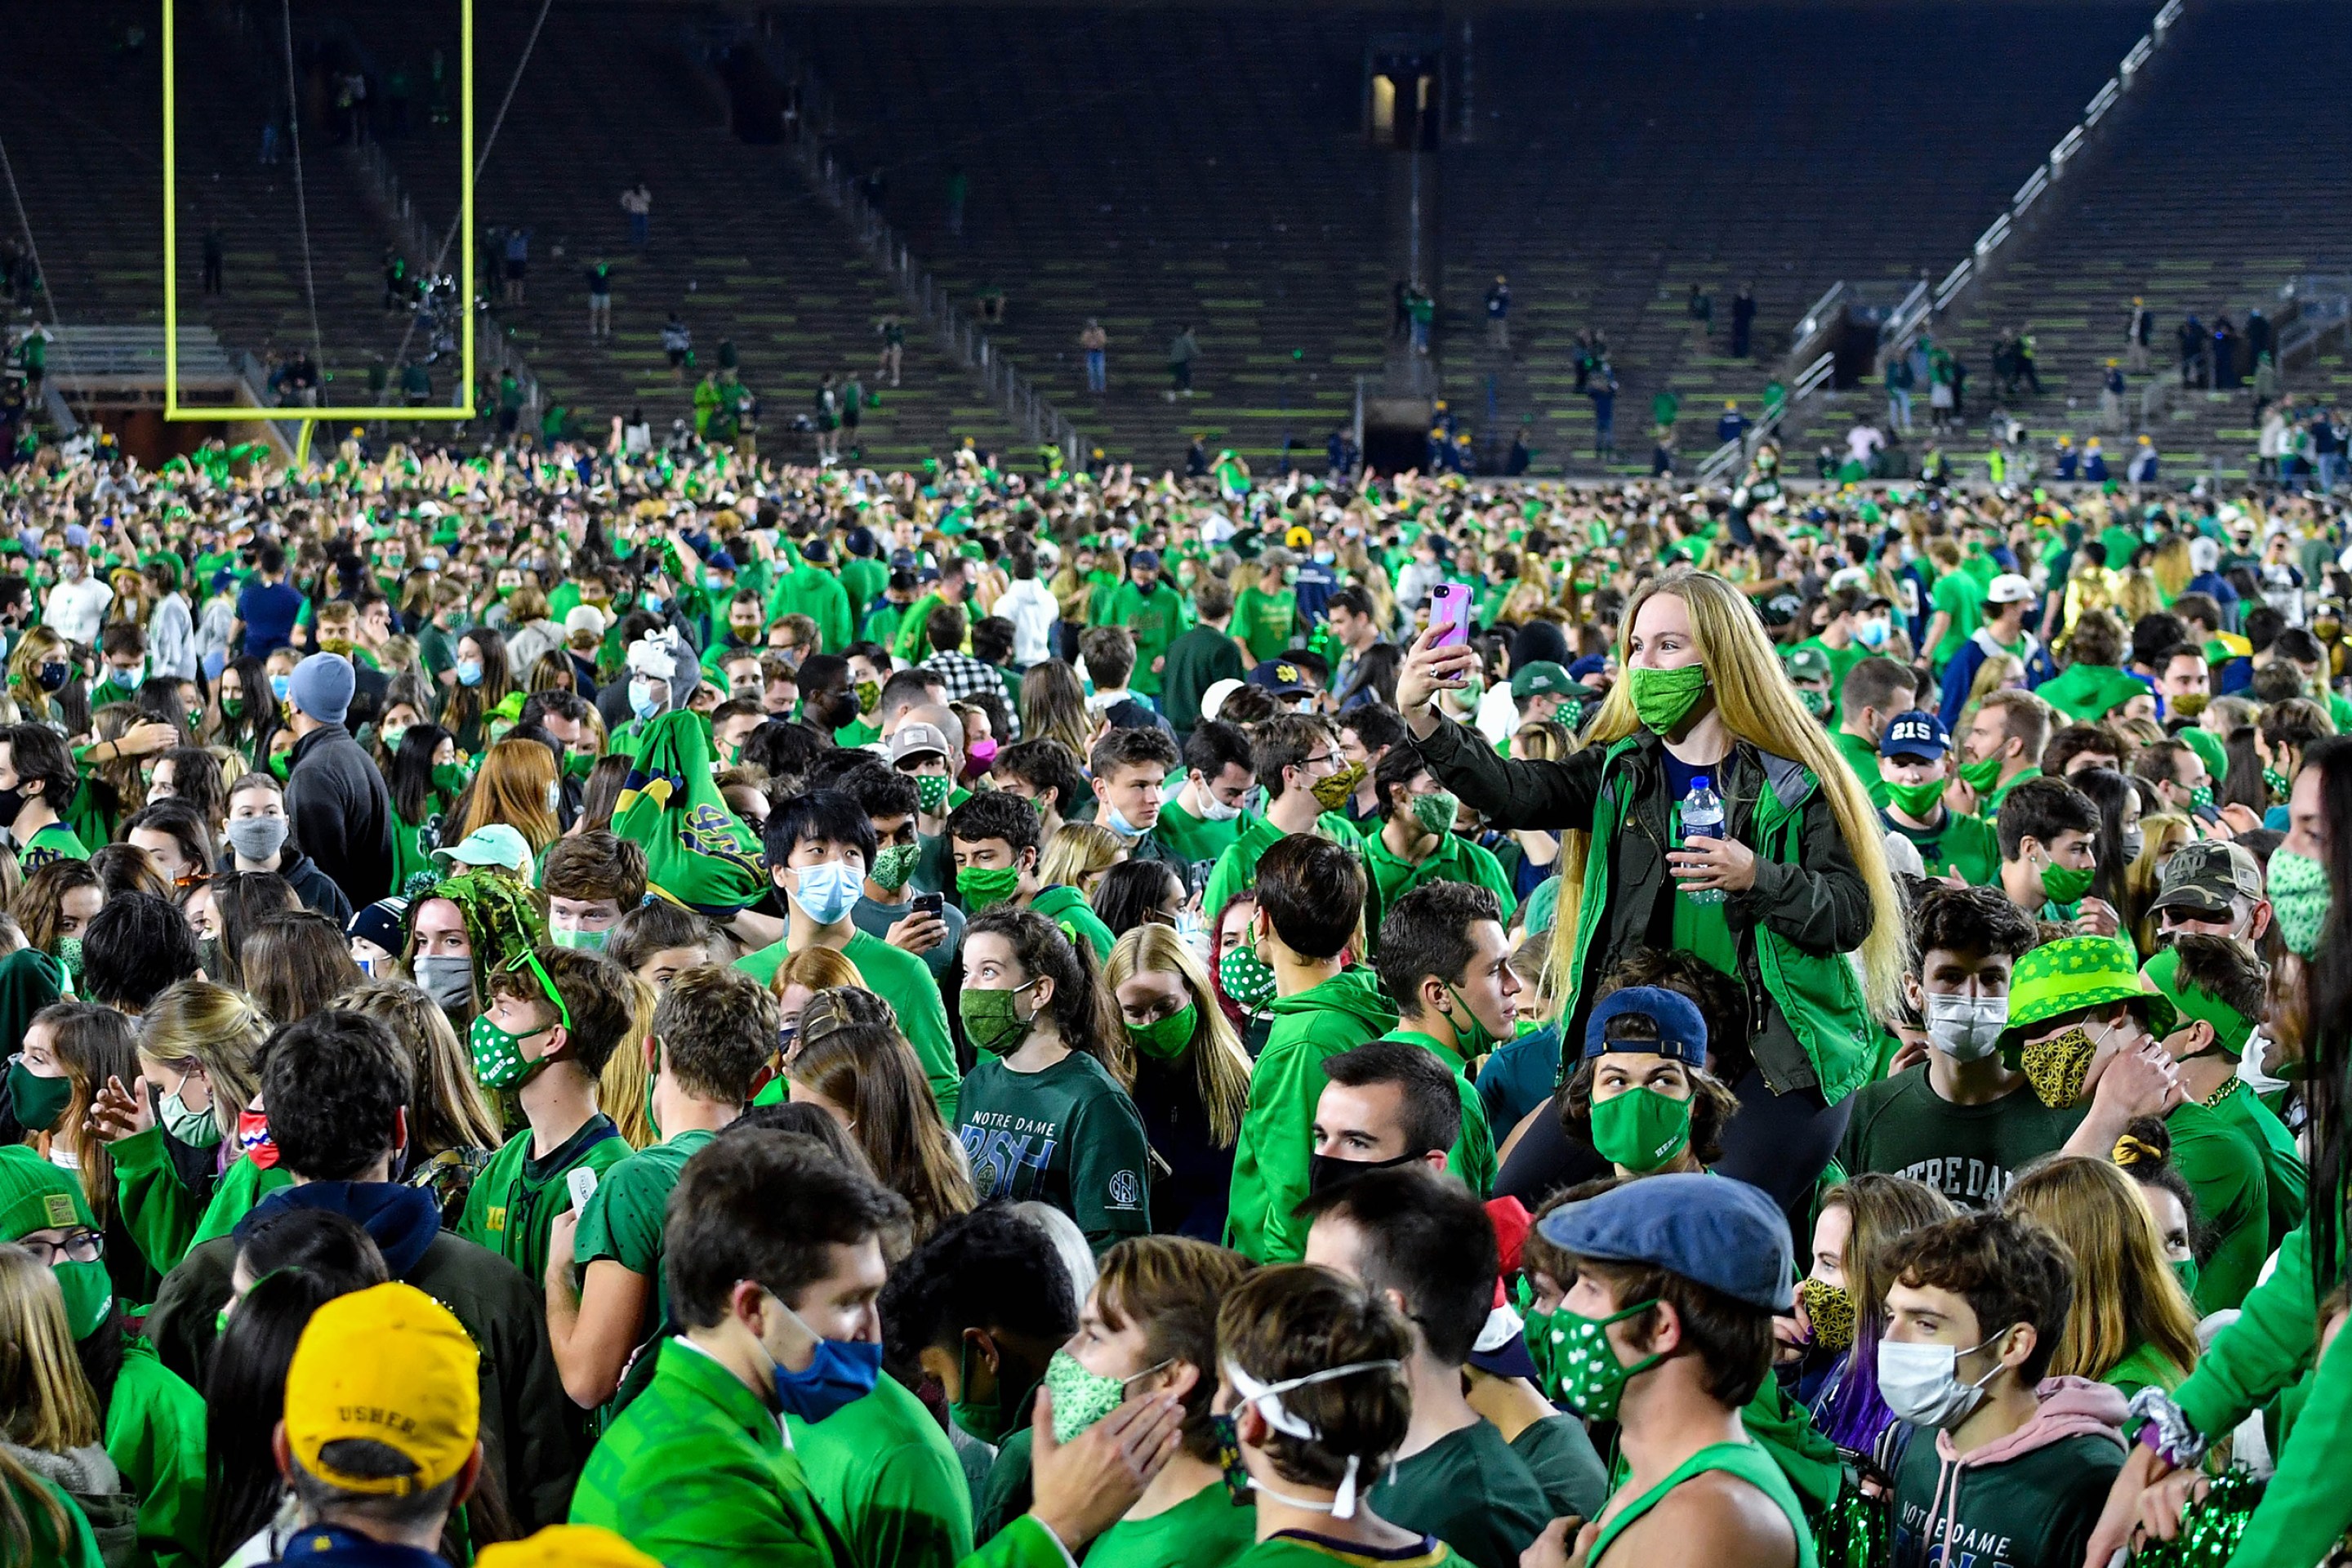 Fans storm the field after the Notre Dame Fighting Irish defeated the Clemson Tigers 47-40 in double overtime at Notre Dame Stadium on November 7, 2020